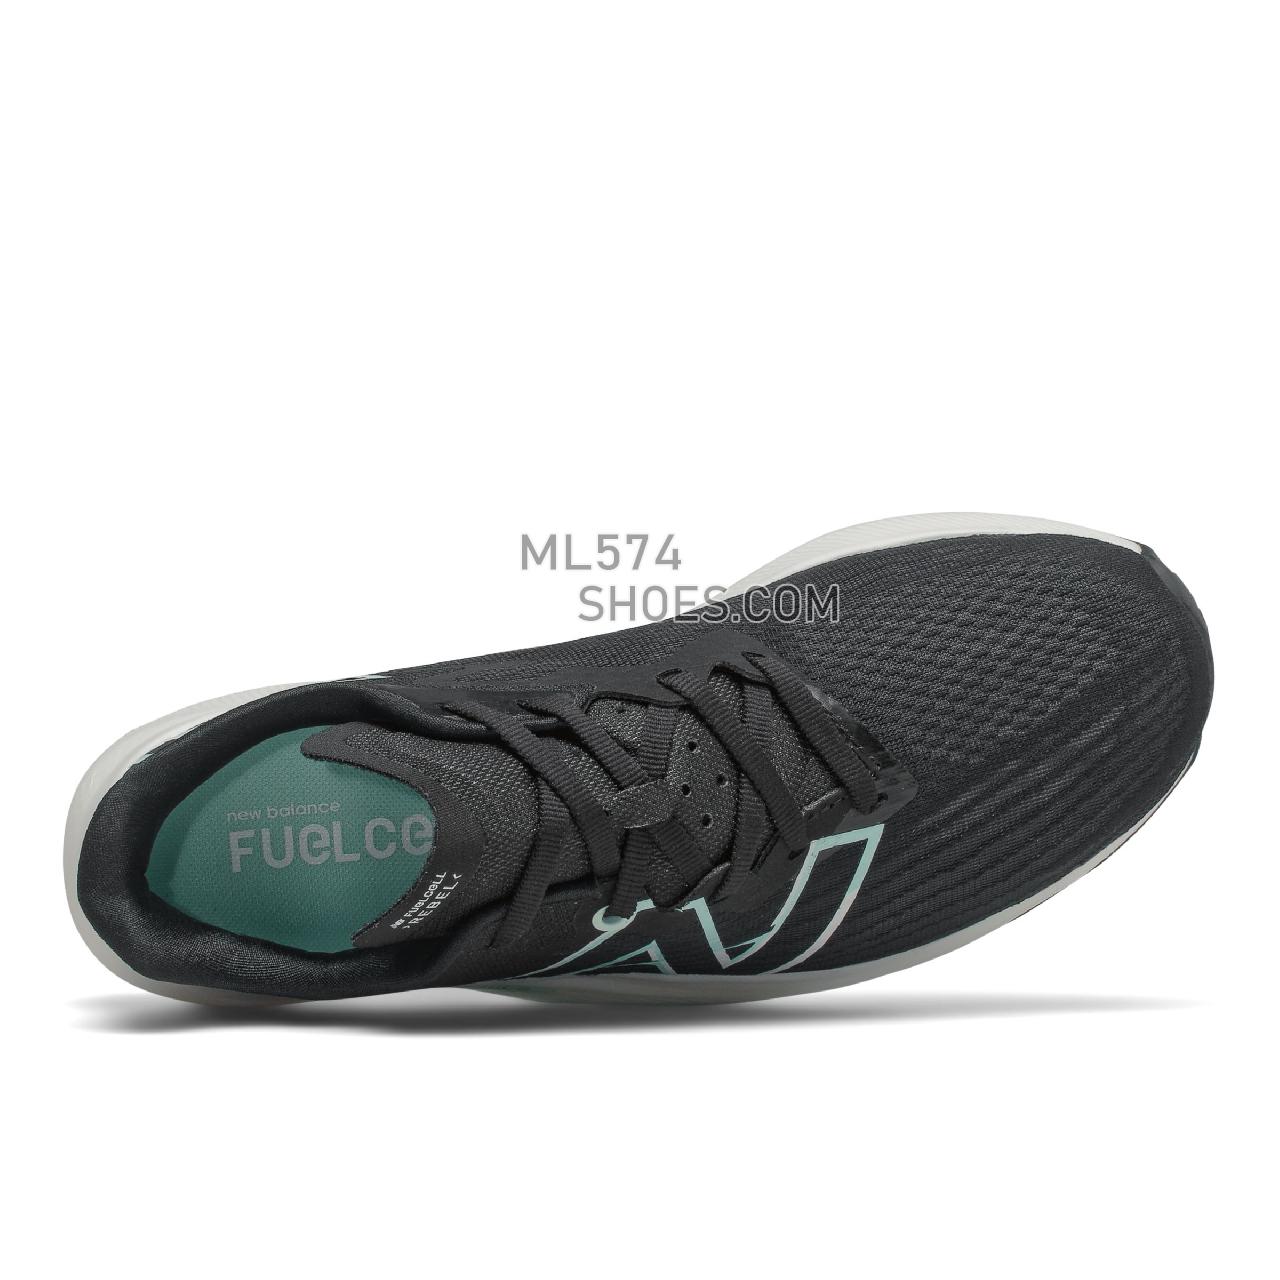 New Balance FuelCell Rebel v2 - Women's Neutral Running - Black with White Mint and Citrus Punch - WFCXLR2